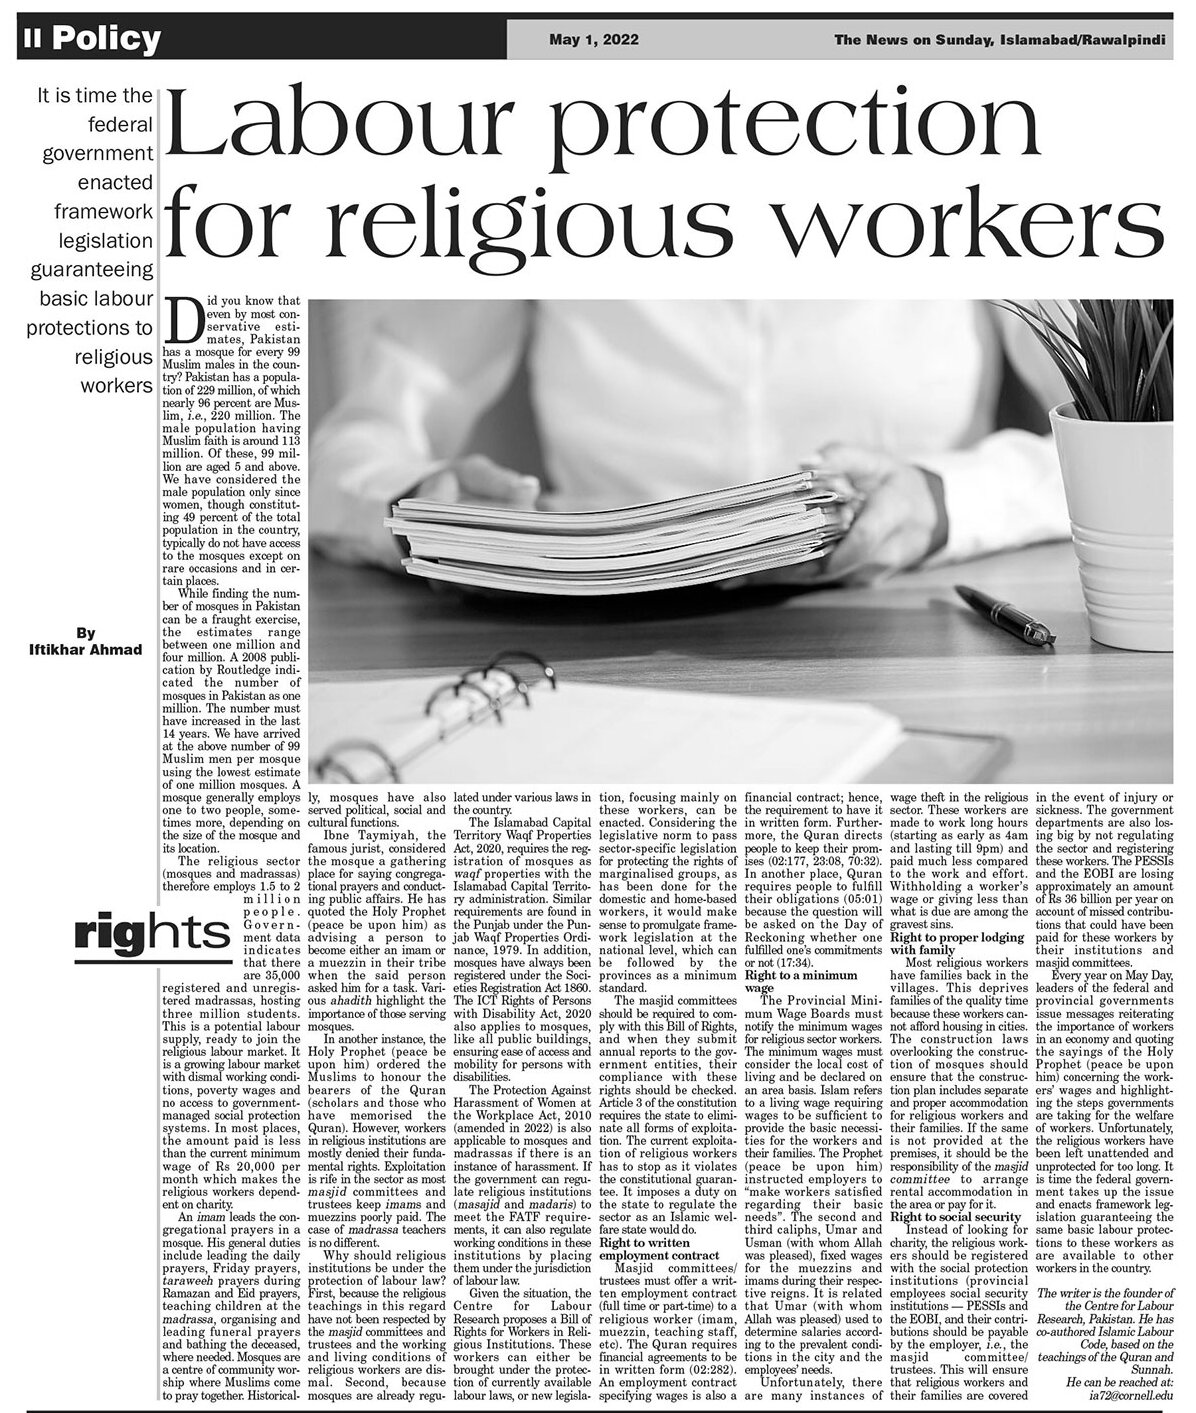 Labour protection for religious workers article